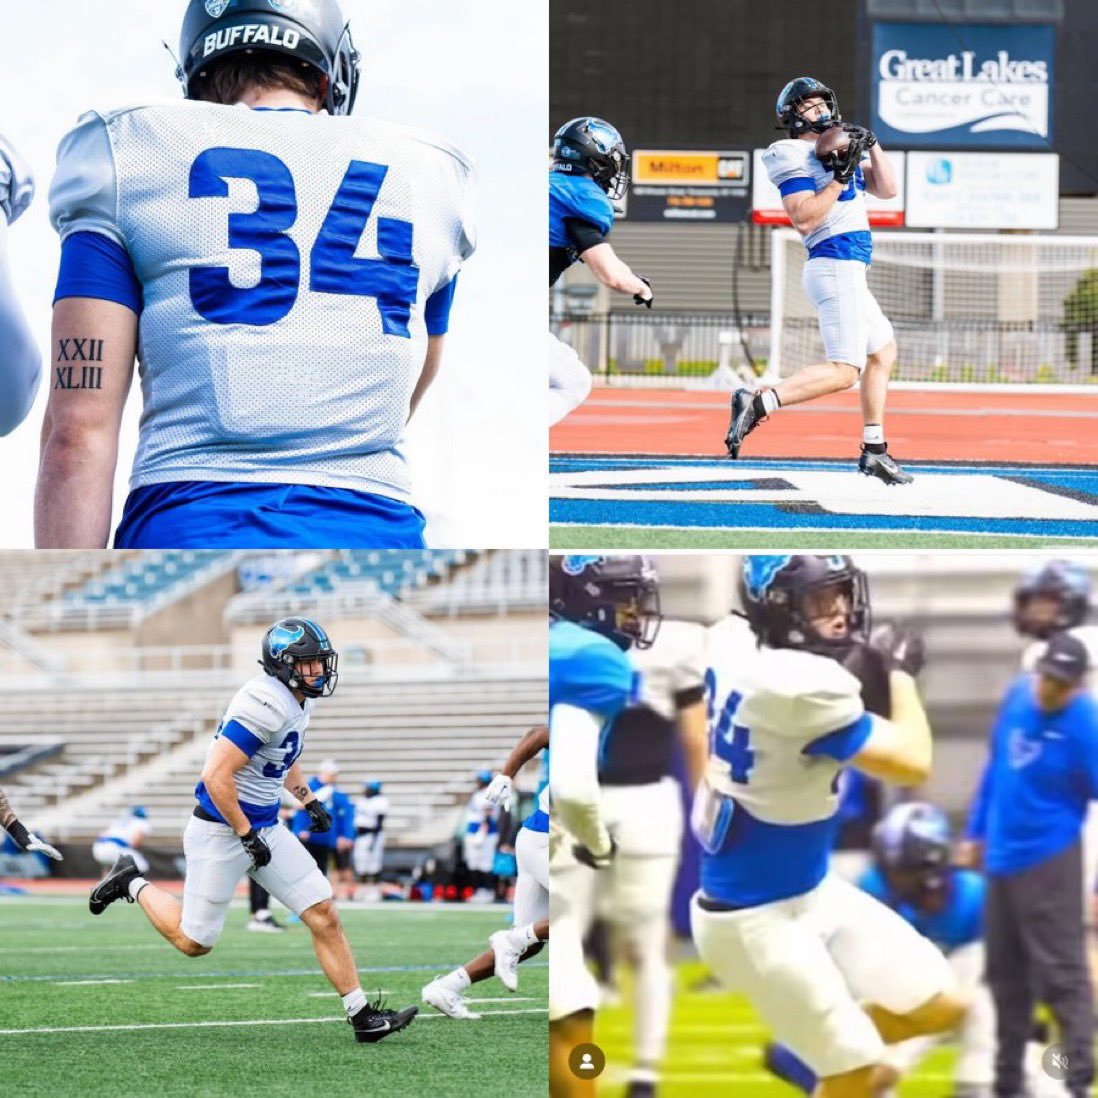 We see you #34 Buffalo WR Bodhi Ogg getting it done during Spring Football. @UBFootball